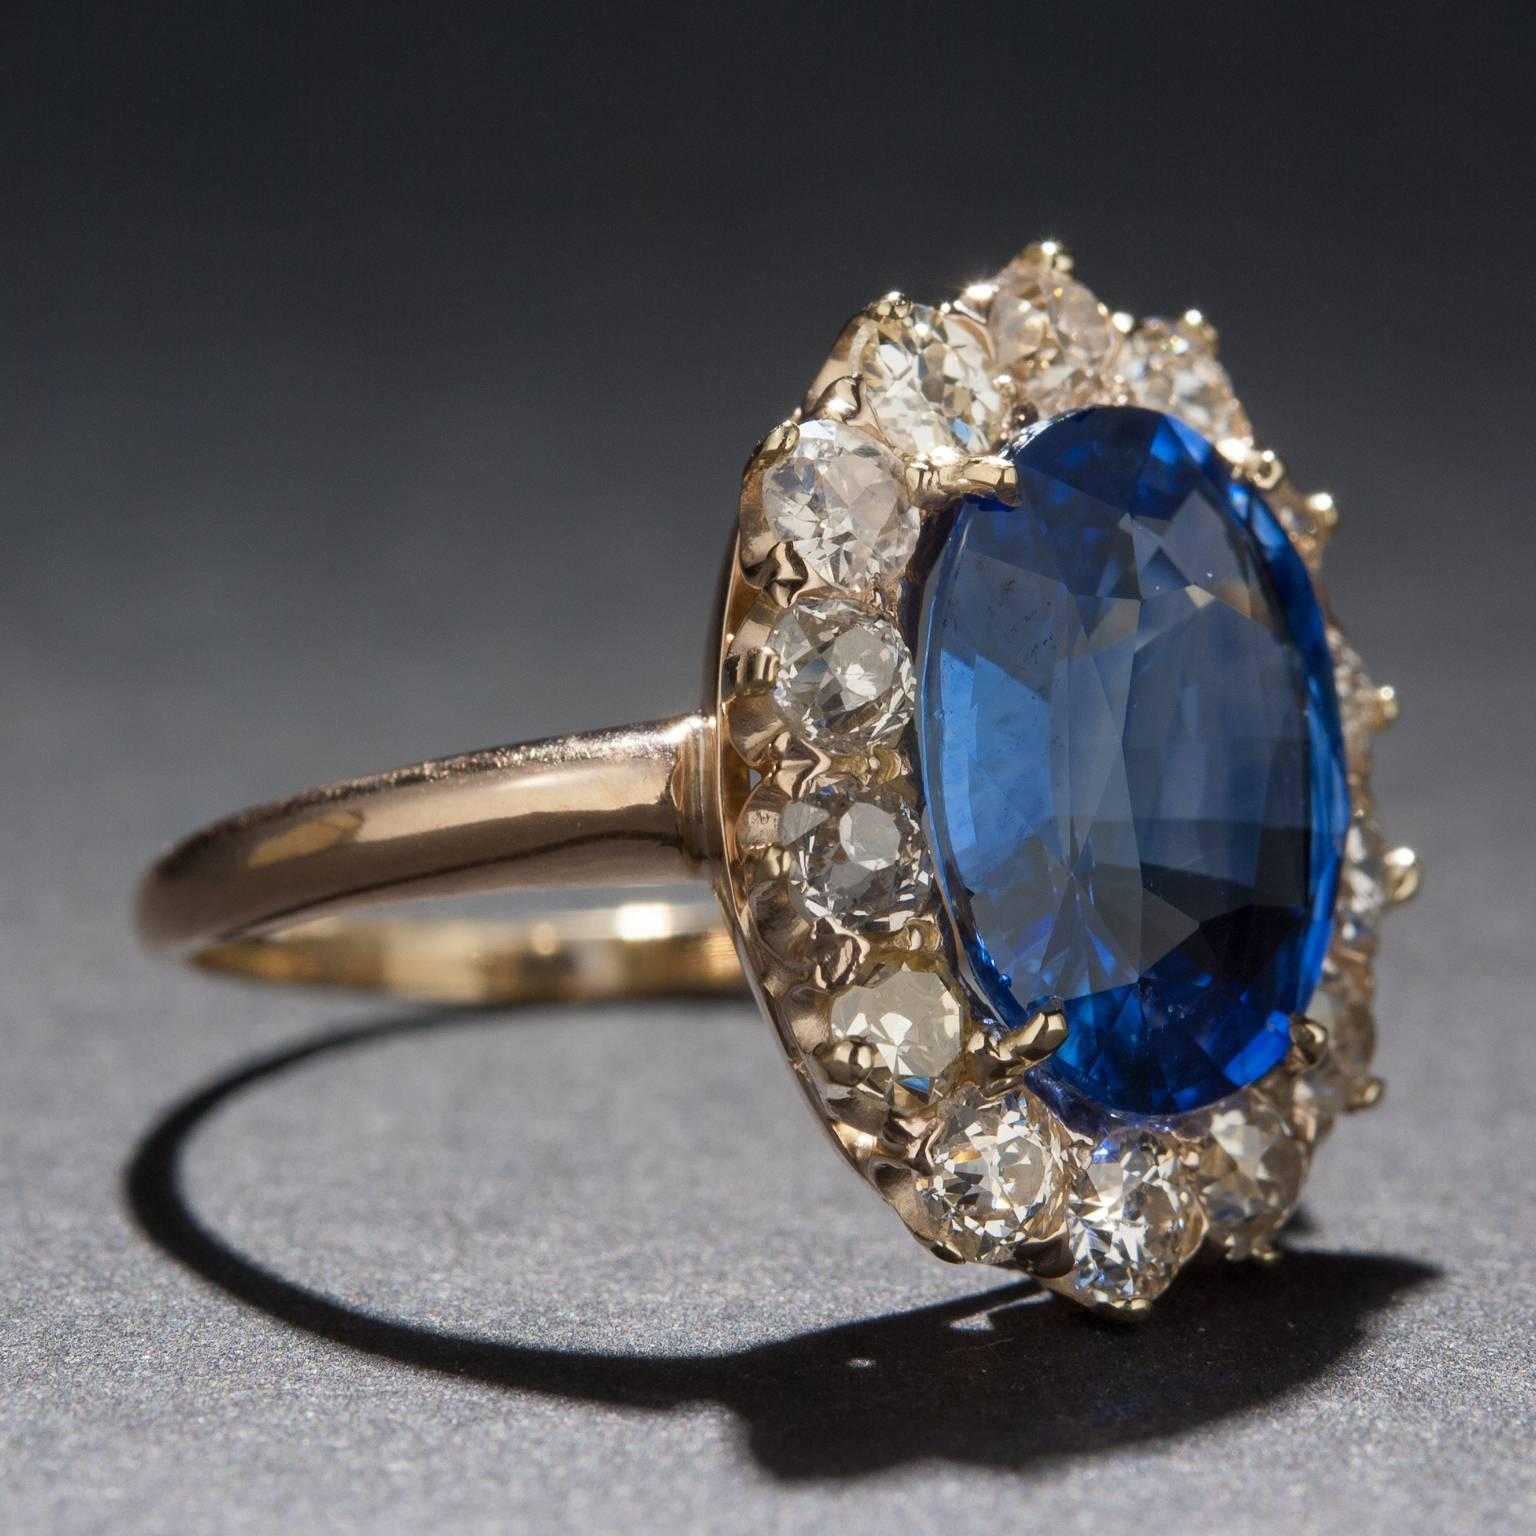 An absolutely beautiful 4.71ct oval cut sapphire dazzles at the center of this estate ring. The center sapphire is accented by a total of 1.68 total carats of sparkling diamonds and the ring itself is crafted in 14k yellow gold. This stunning piece